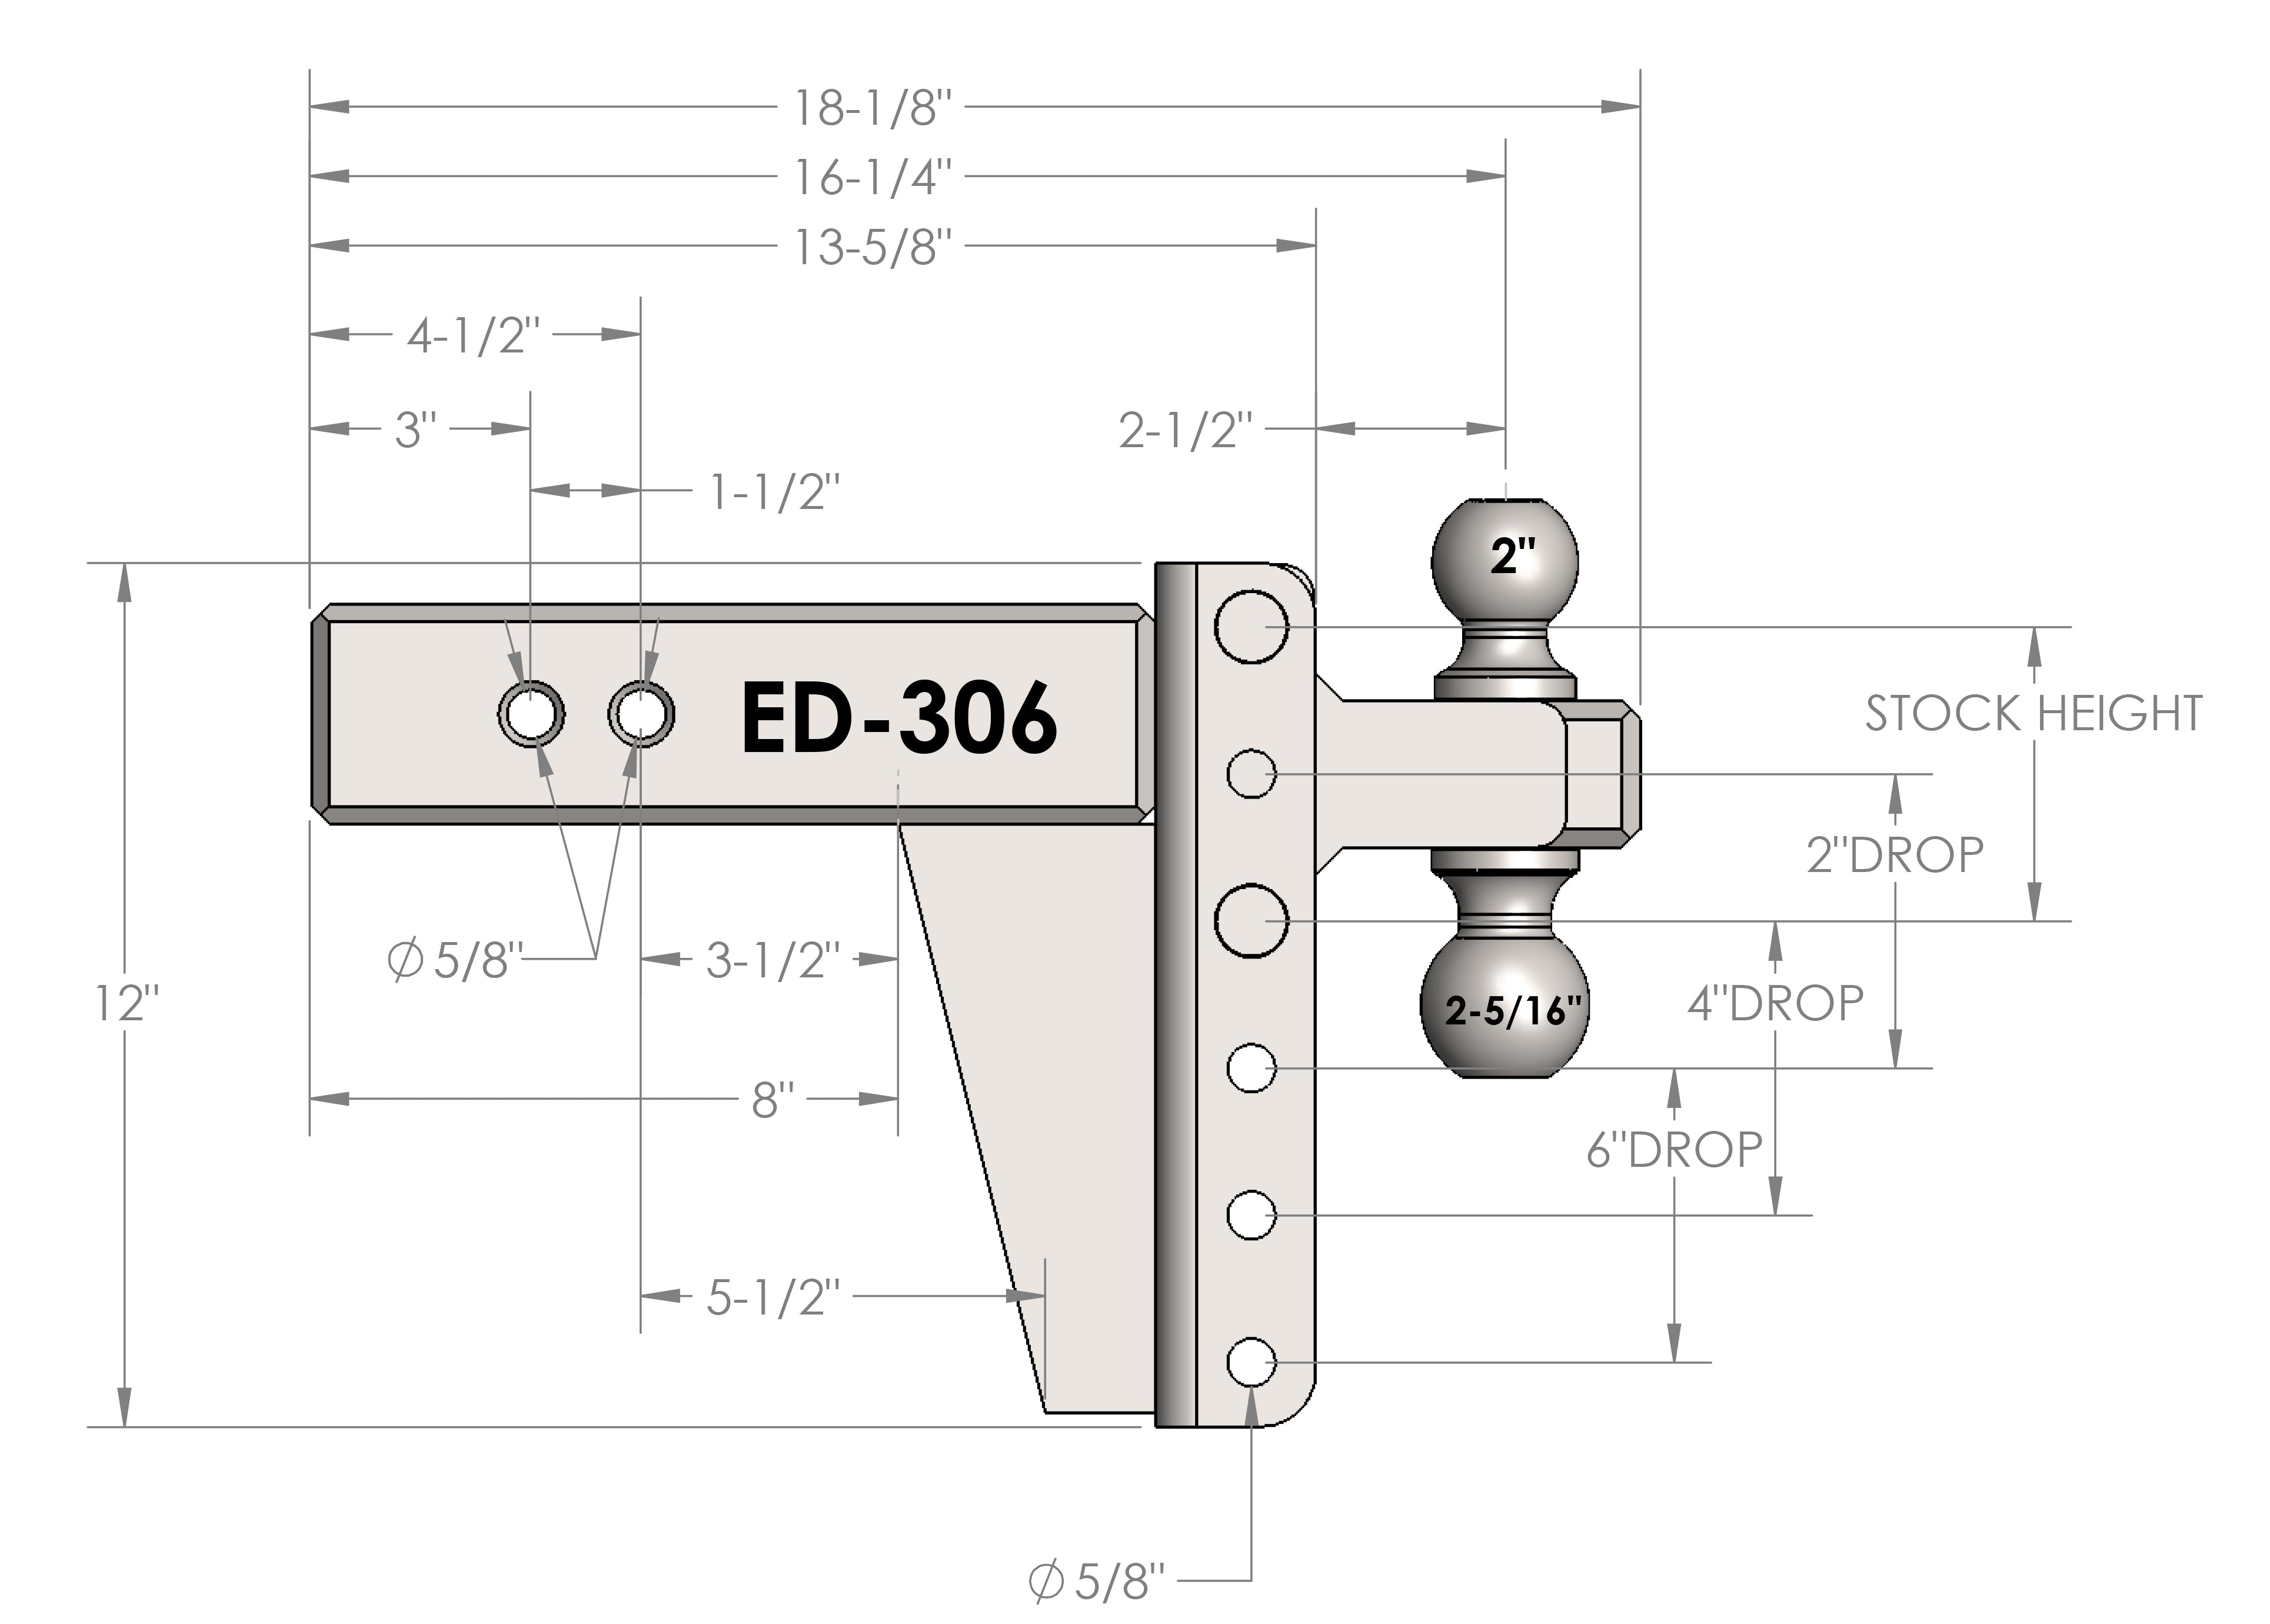 3.0" Extreme Duty 6" Drop/Rise Hitch Design Specification